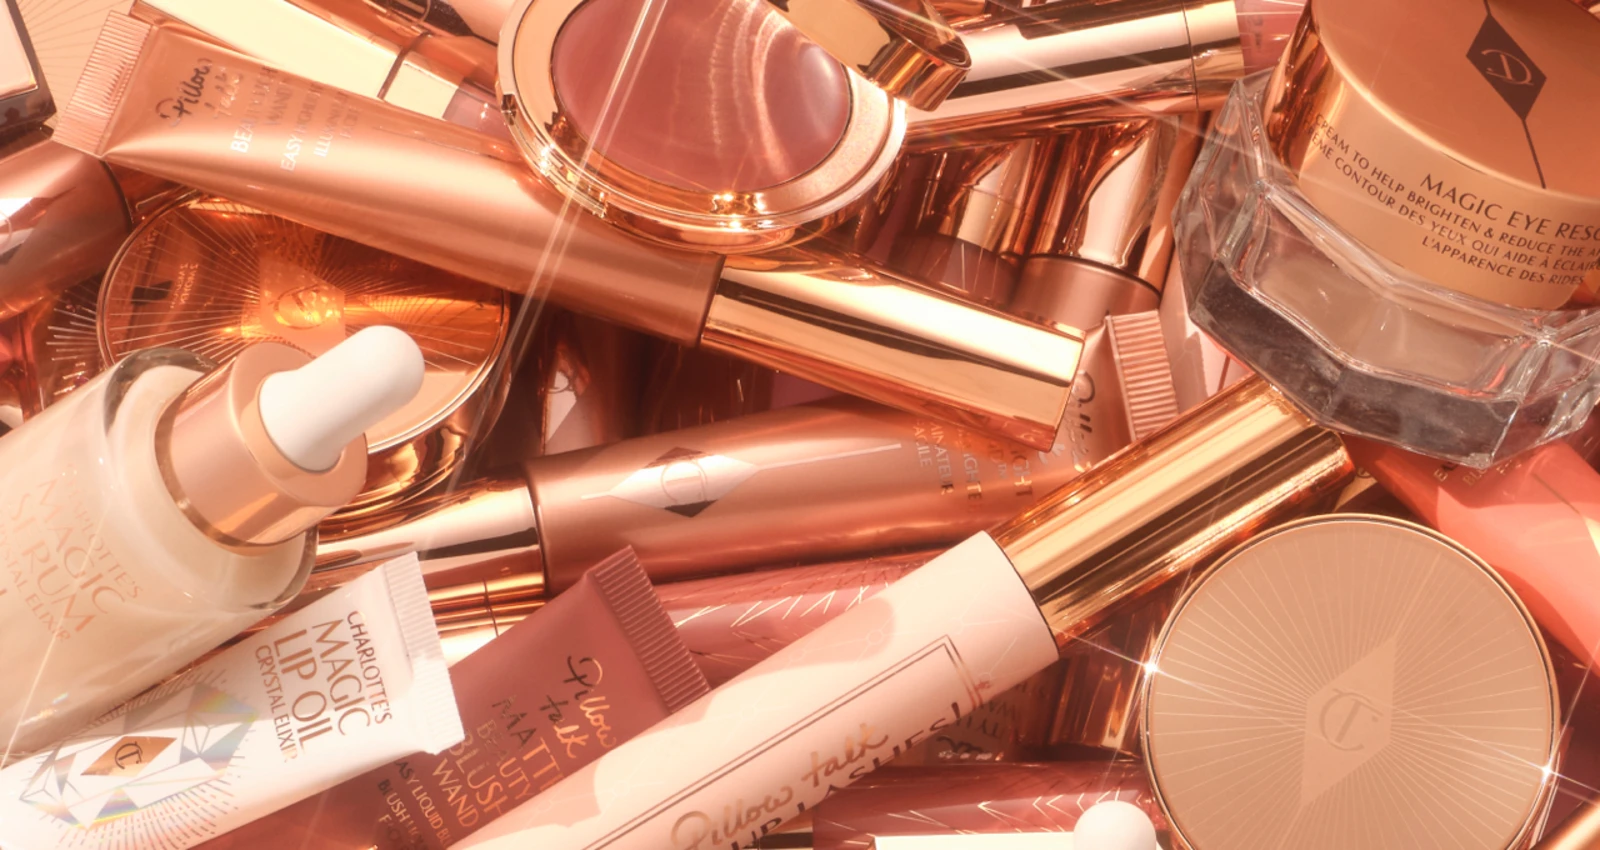 Charlotte tilbury products piled up